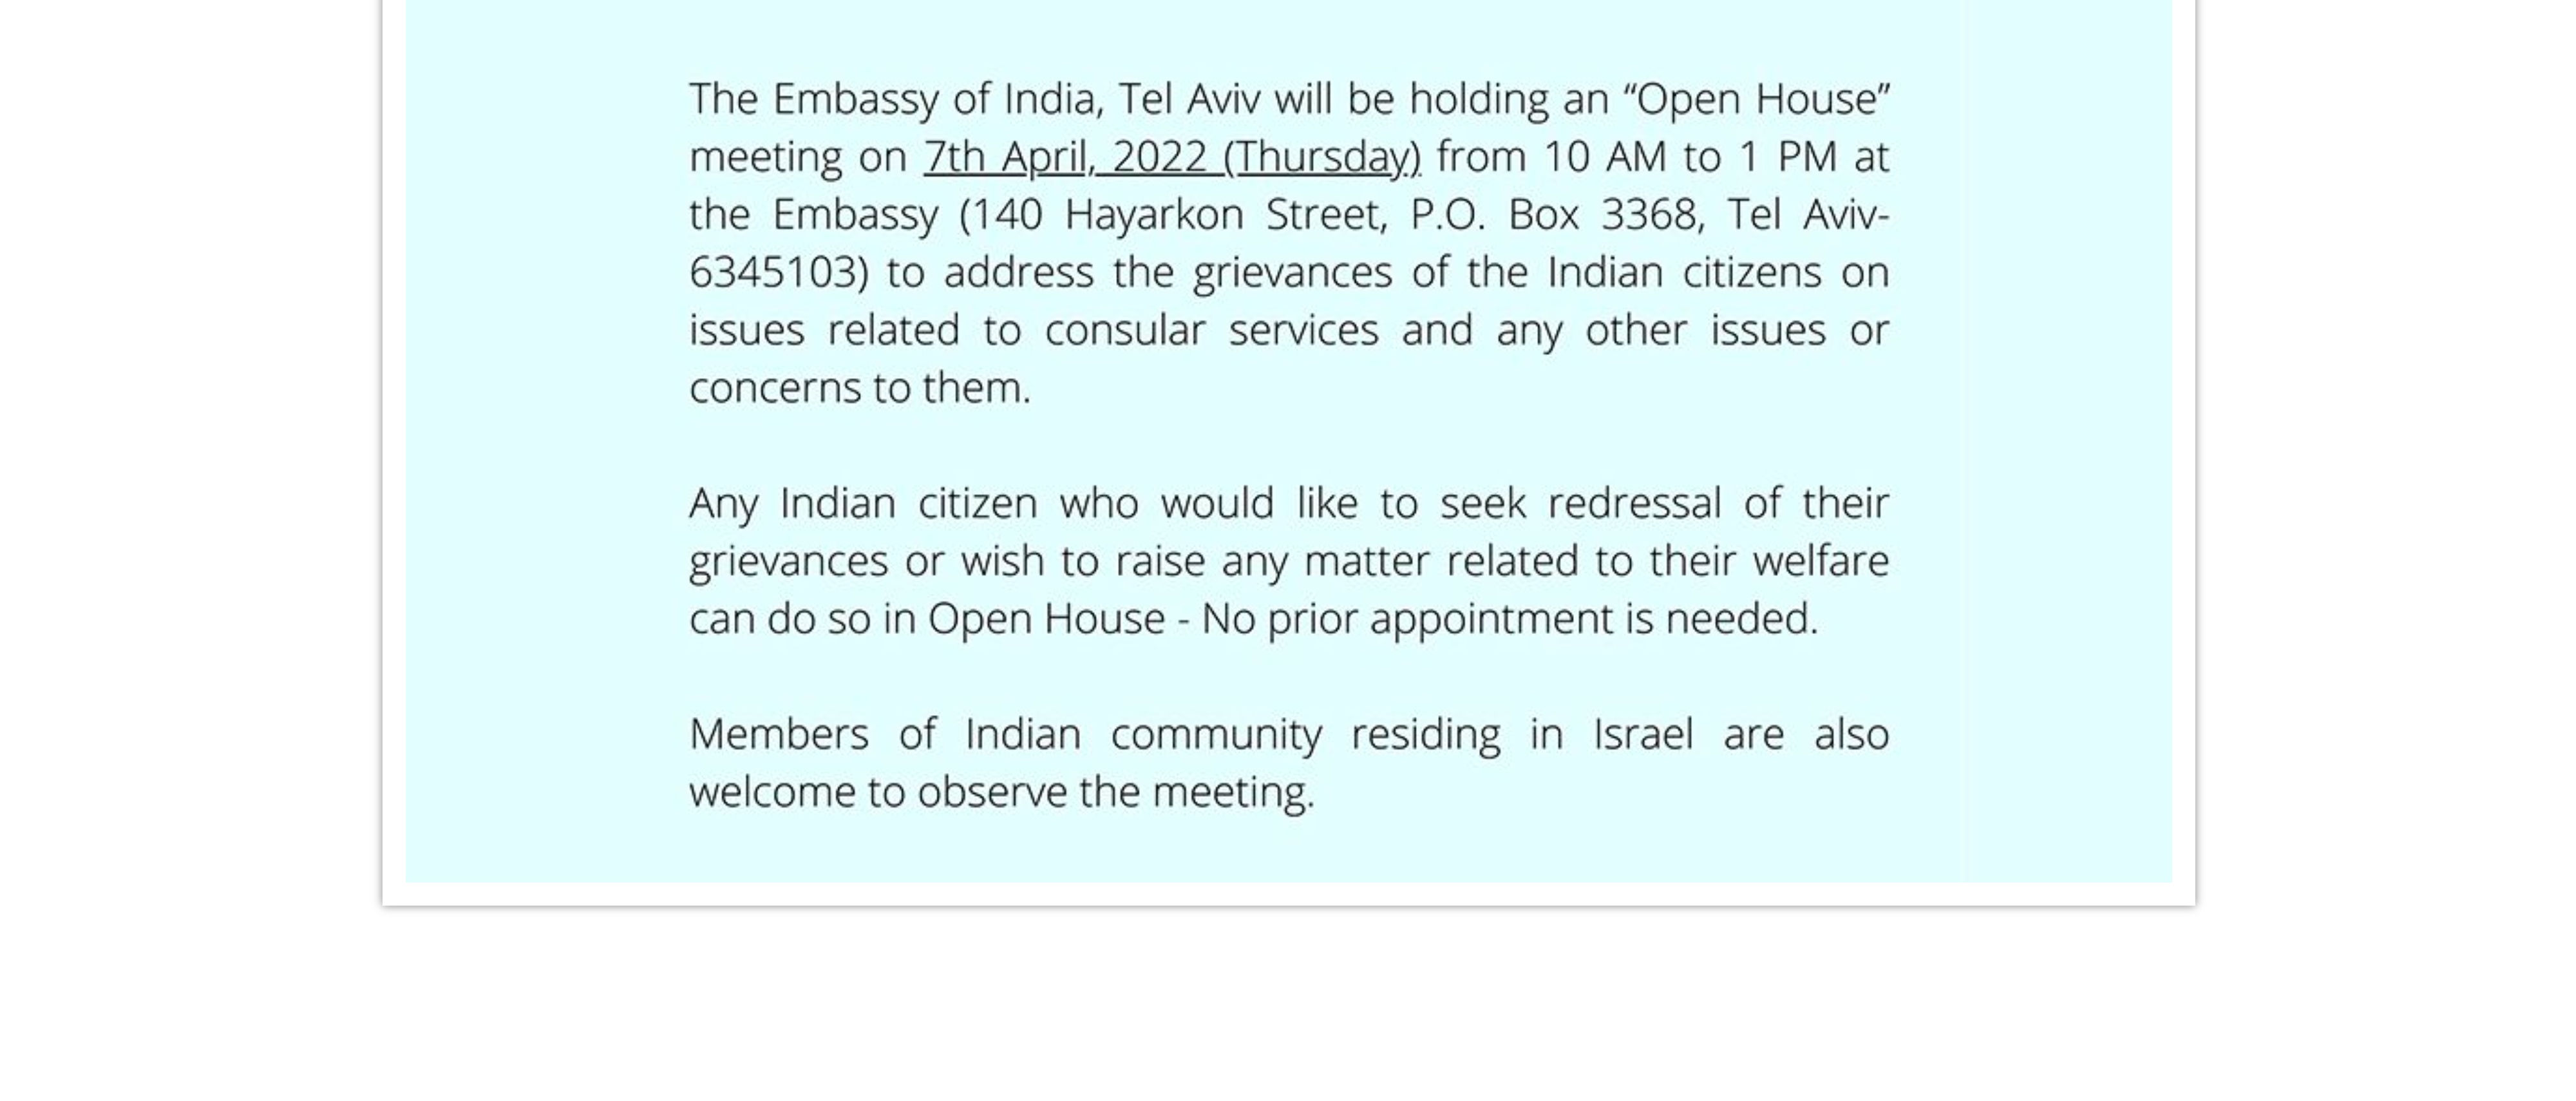  OPEN HOUSE ON APRIL 07, 2022, TO ADDRESS COMPLAINTS/GRIEVANCES RELATING TO CONSULAR MATTERS OR ANY OTHER ISSUES OR CONCERNS OF INDIAN NATIONALS